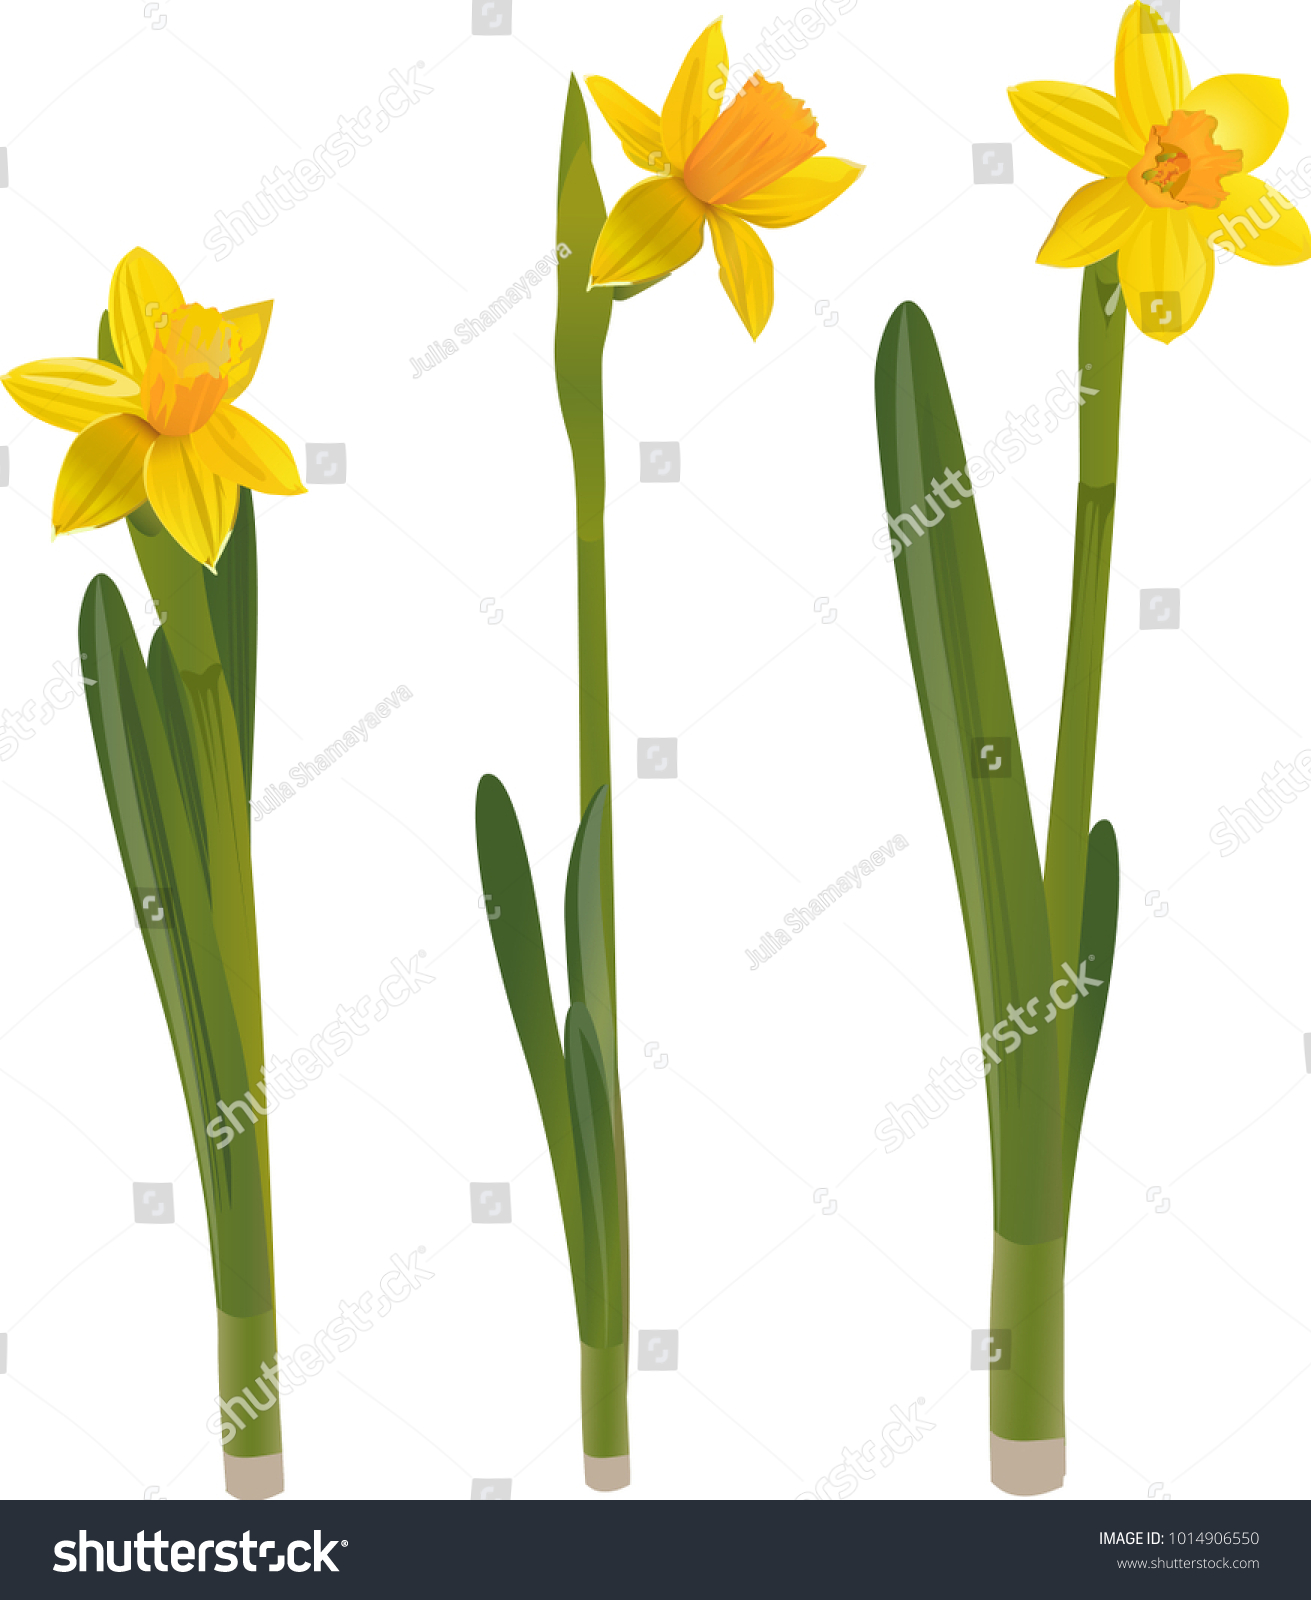 SVG of Daffodils on a white background. Vector illustration. svg